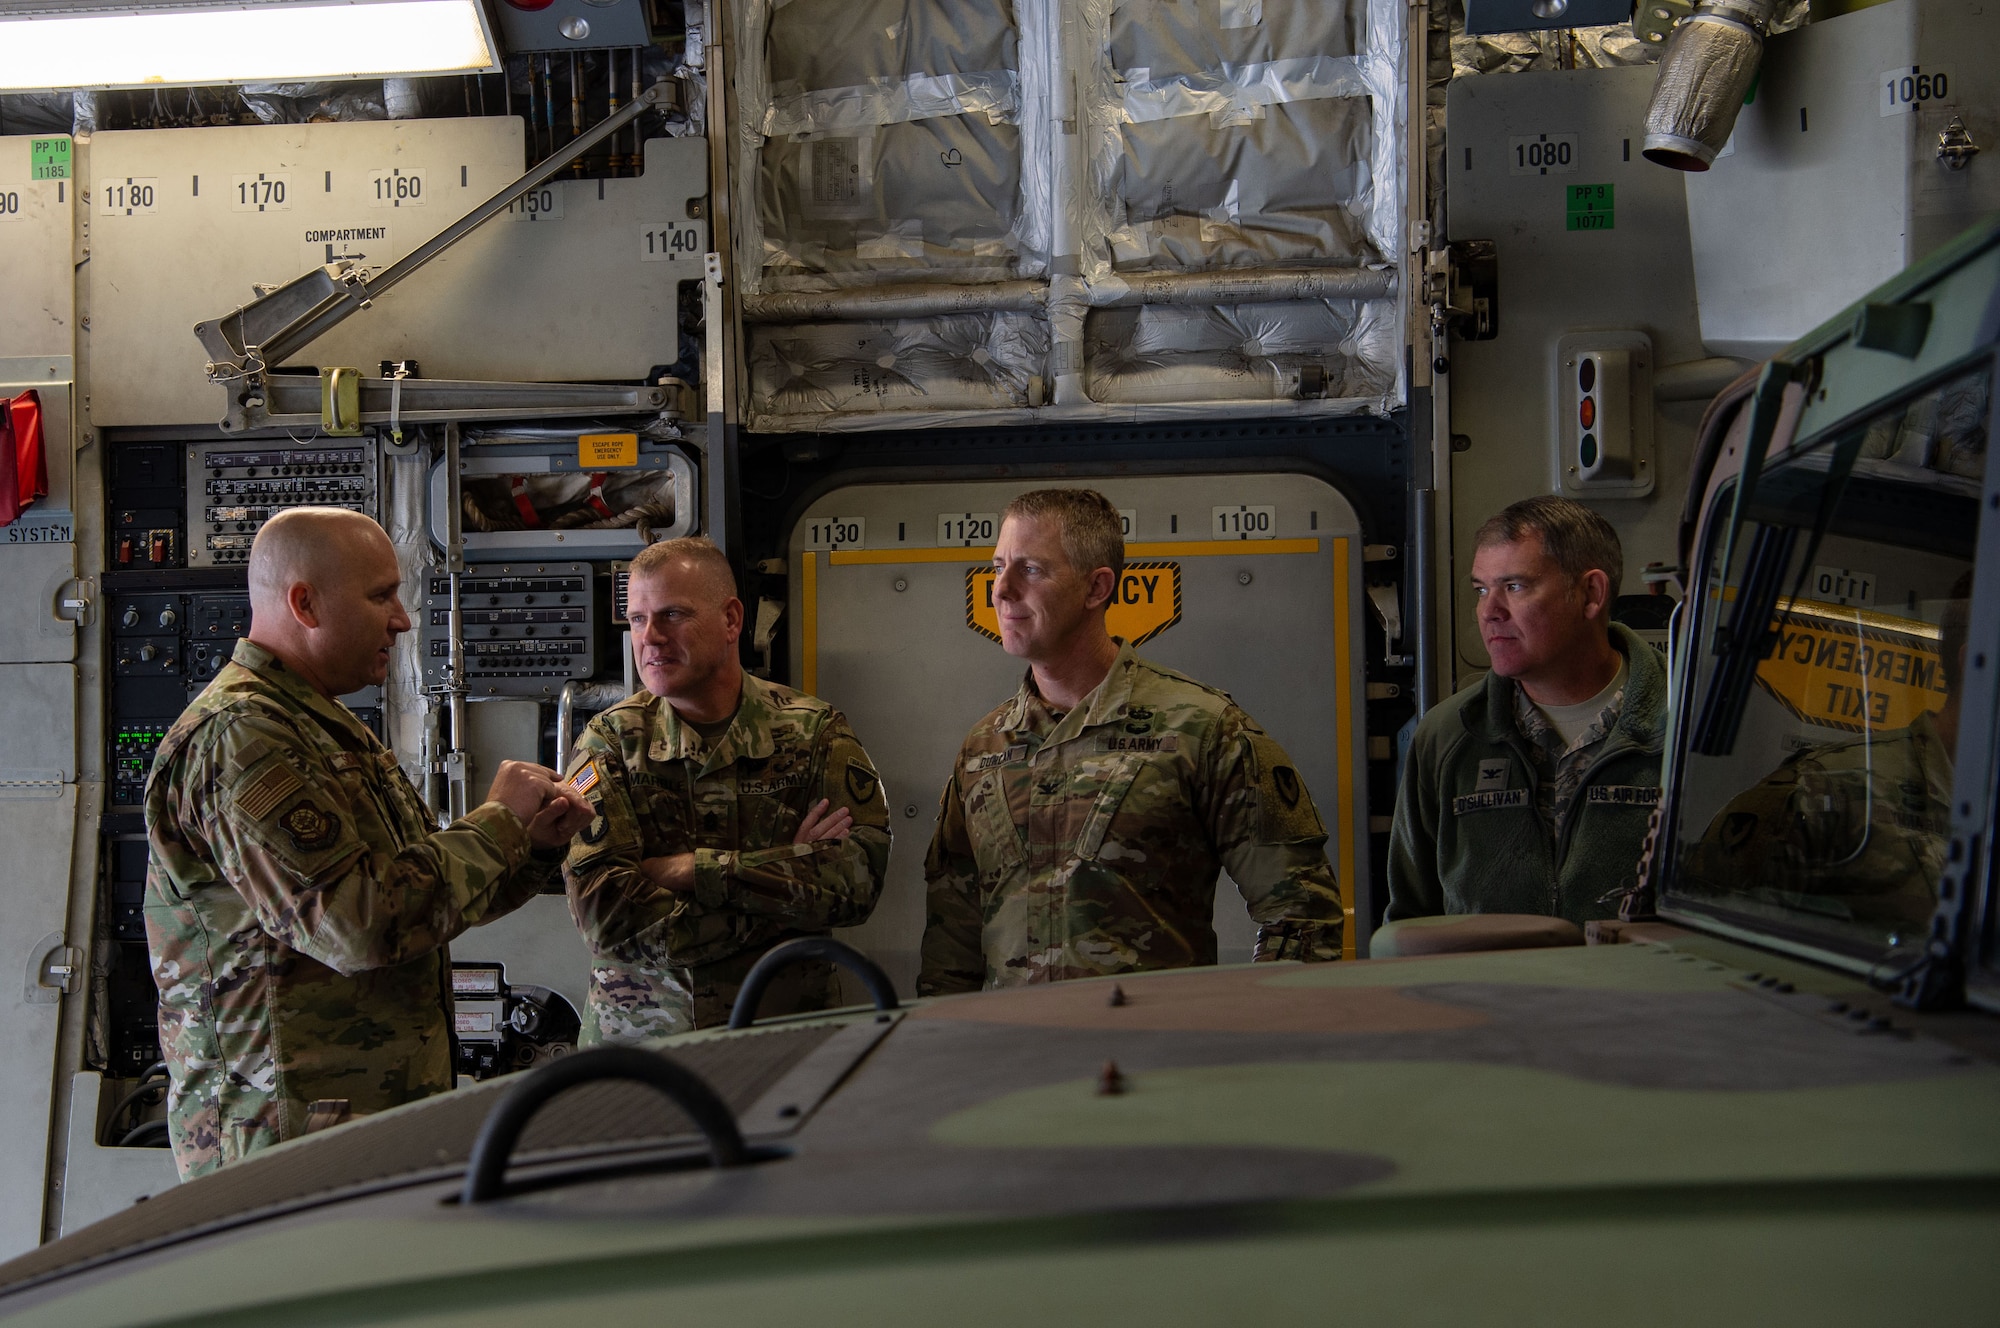 From left, U.S. Air Force Chief Master Sgt. Robert Schultz, 62nd Airlift Wing command chief; U.S. Army Command Sgt. Maj. Timothy Marble, Joint Base Lewis-McChord (JBLM) command sergeant major; U.S. Army Col. Skye Duncan, JBLM commander; and U.S. Air Force Col. Patrick O’Sullivan, JBLM vice commander and 627th Air Base Group commander, witness how U.S. Air Force loadmasters and U.S. Army Soldiers work together to offload Army equipment from a C-17 Globemaster III at Moses Lake Municipal Airport, Wash., Oct. 1, 2019. The purpose of the flight was for Soldiers from the 51st Expeditionary Signal Battalion, 35th Signal Brigade, to test their long-range communication equipment from Moses Lake to JBLM for a mobility movement exercise. (U.S. Air Force photo by Senior Airman Tryphena Mayhugh)